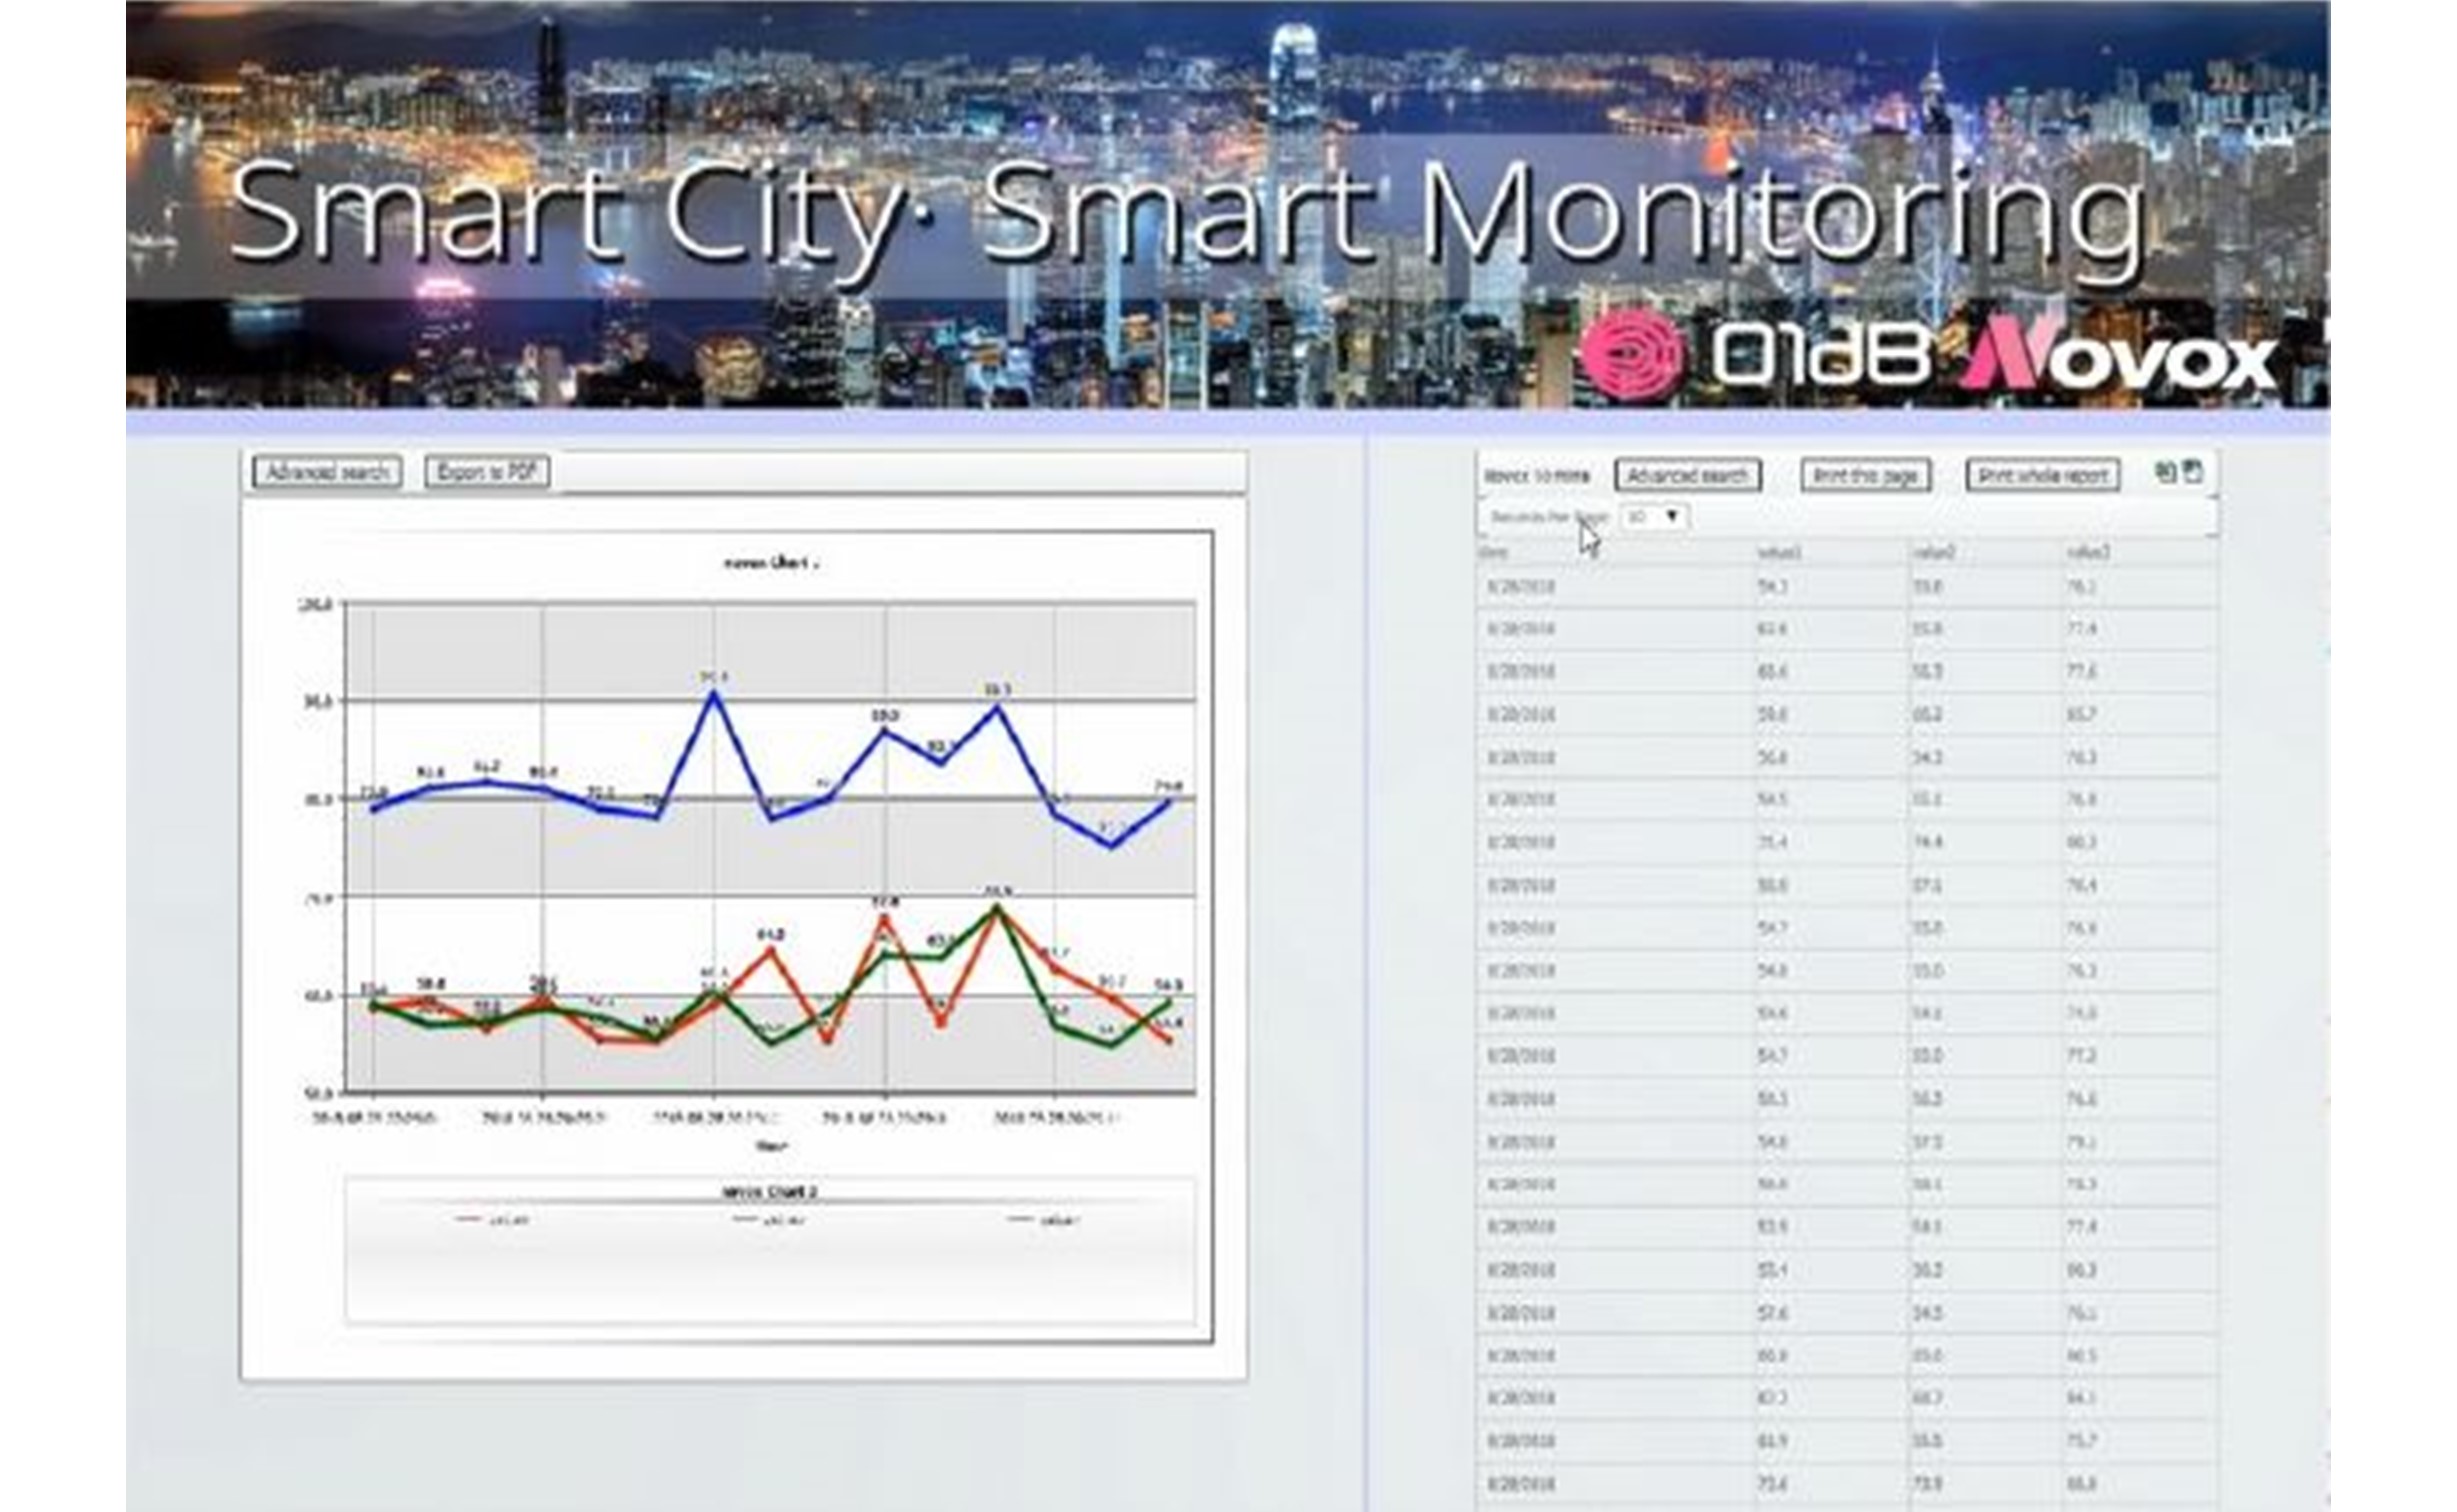 iSmartBuild Real-time Monitoring System